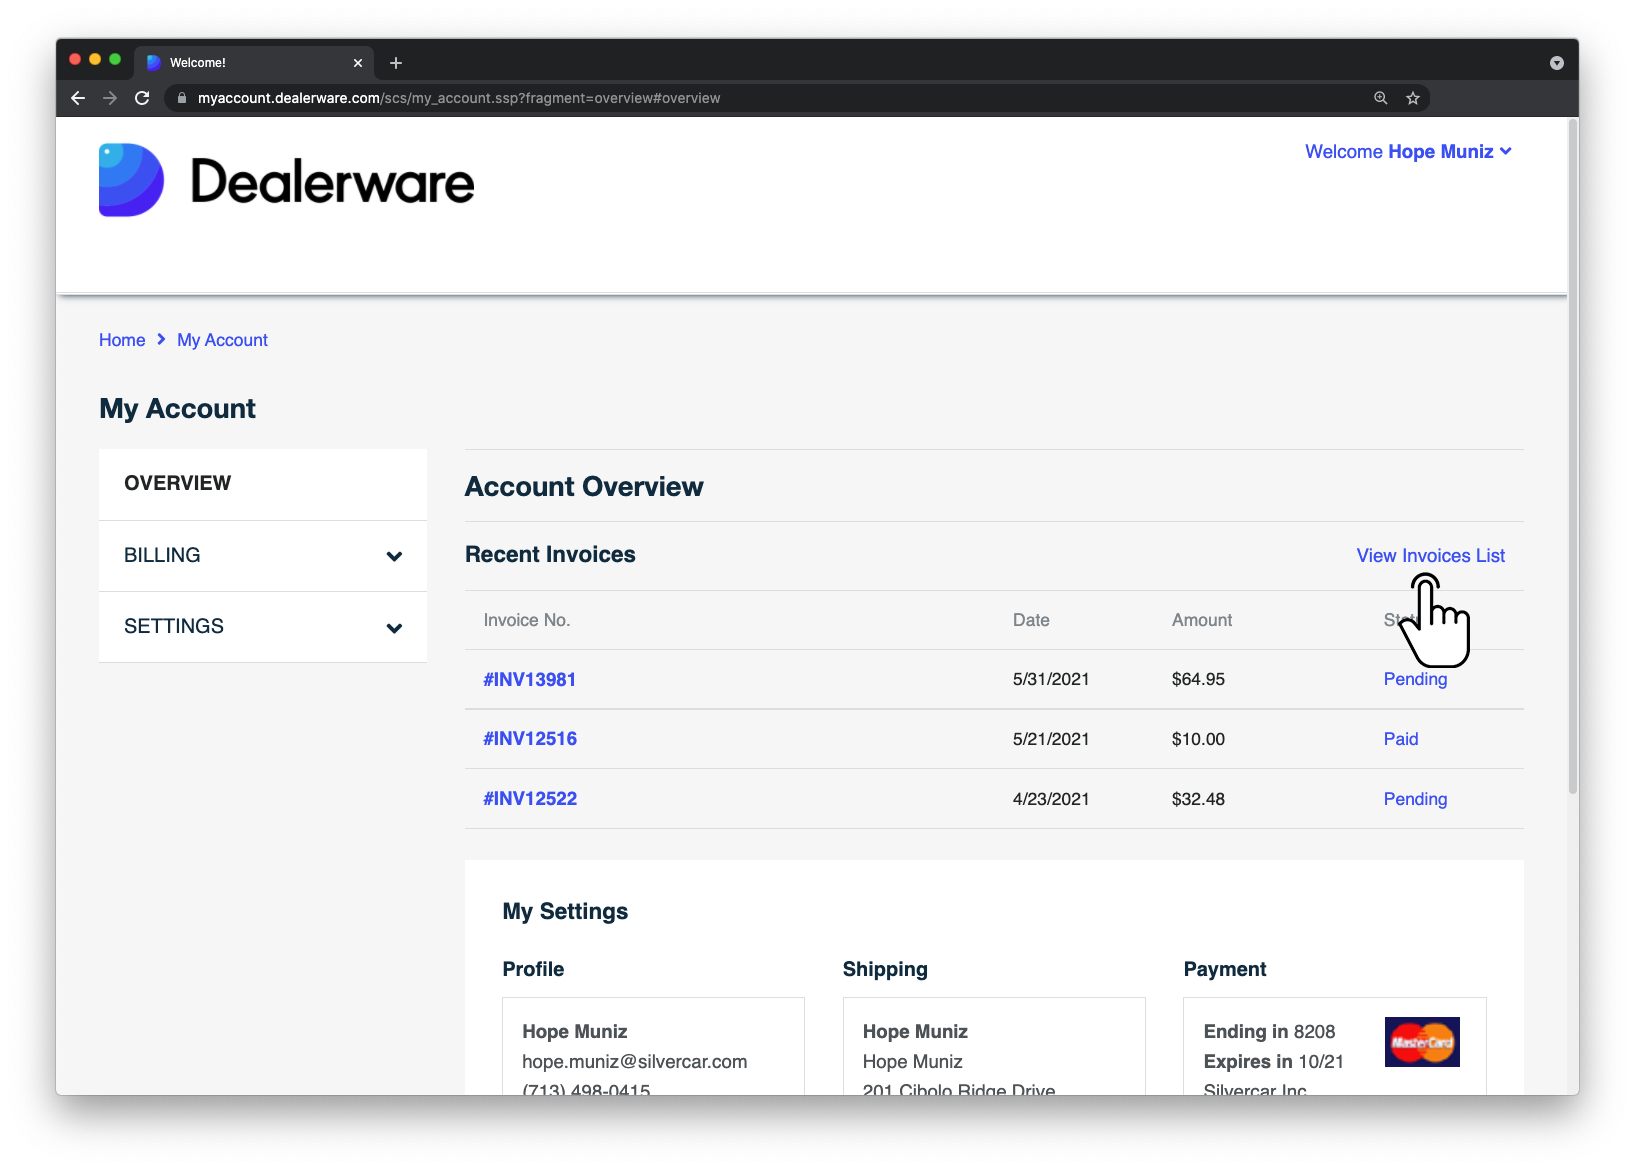 Image 6: Dealerware MyAccount screen, fingertap icon positioned over View Invoices List button in Recent Invoices section